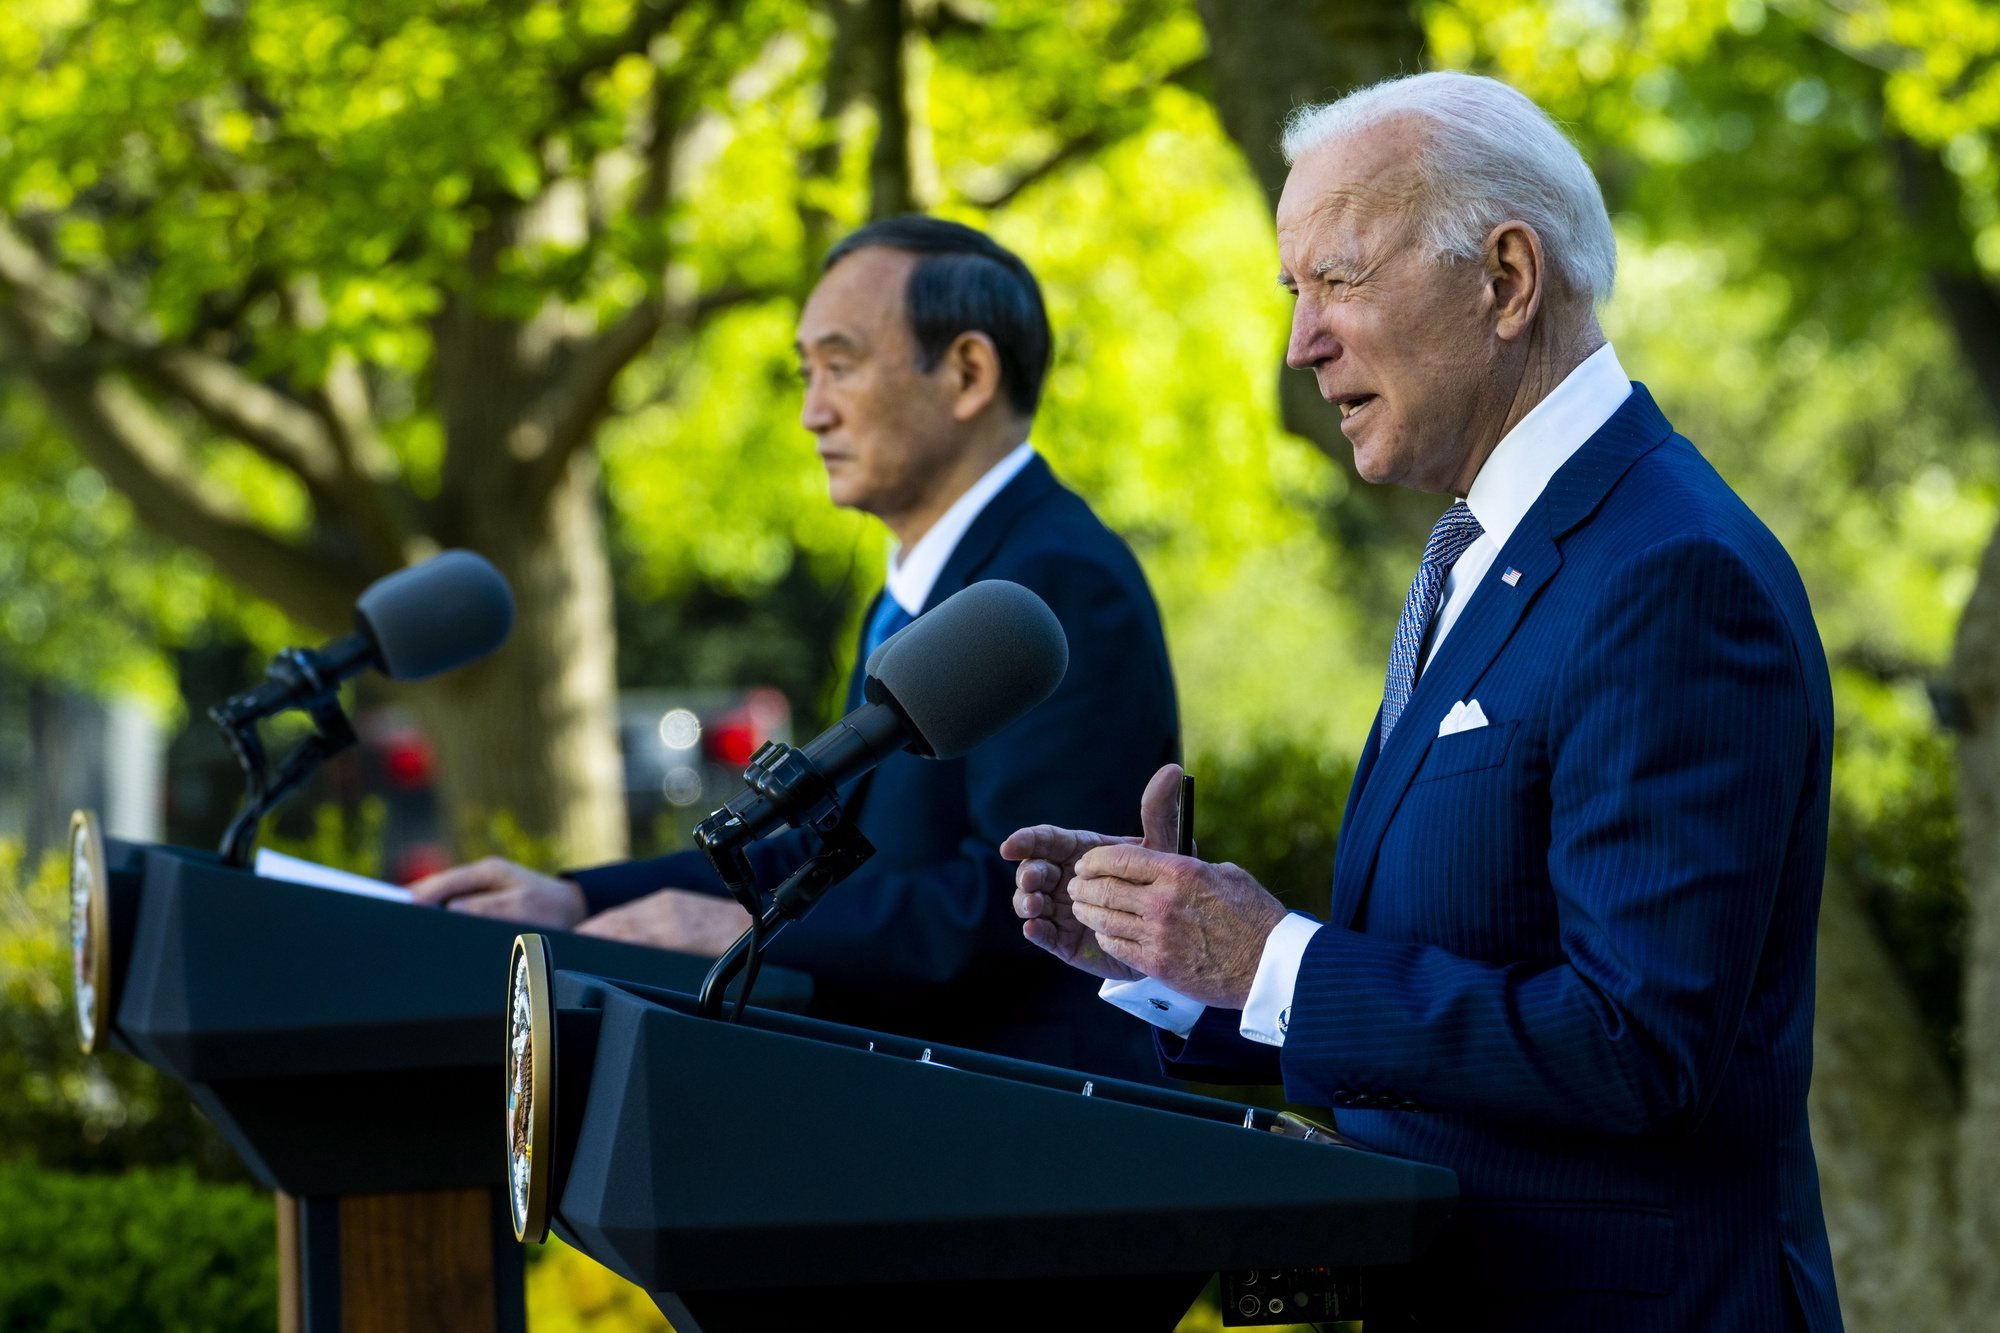 epa09140453 US President Joe Biden (R) and Prime Minister of Japan Suga Yoshihide (L) during a joint news conference at the White House, in Washington, DC, USA, 16 April 2021.  EPA/Doug Mills / POOL